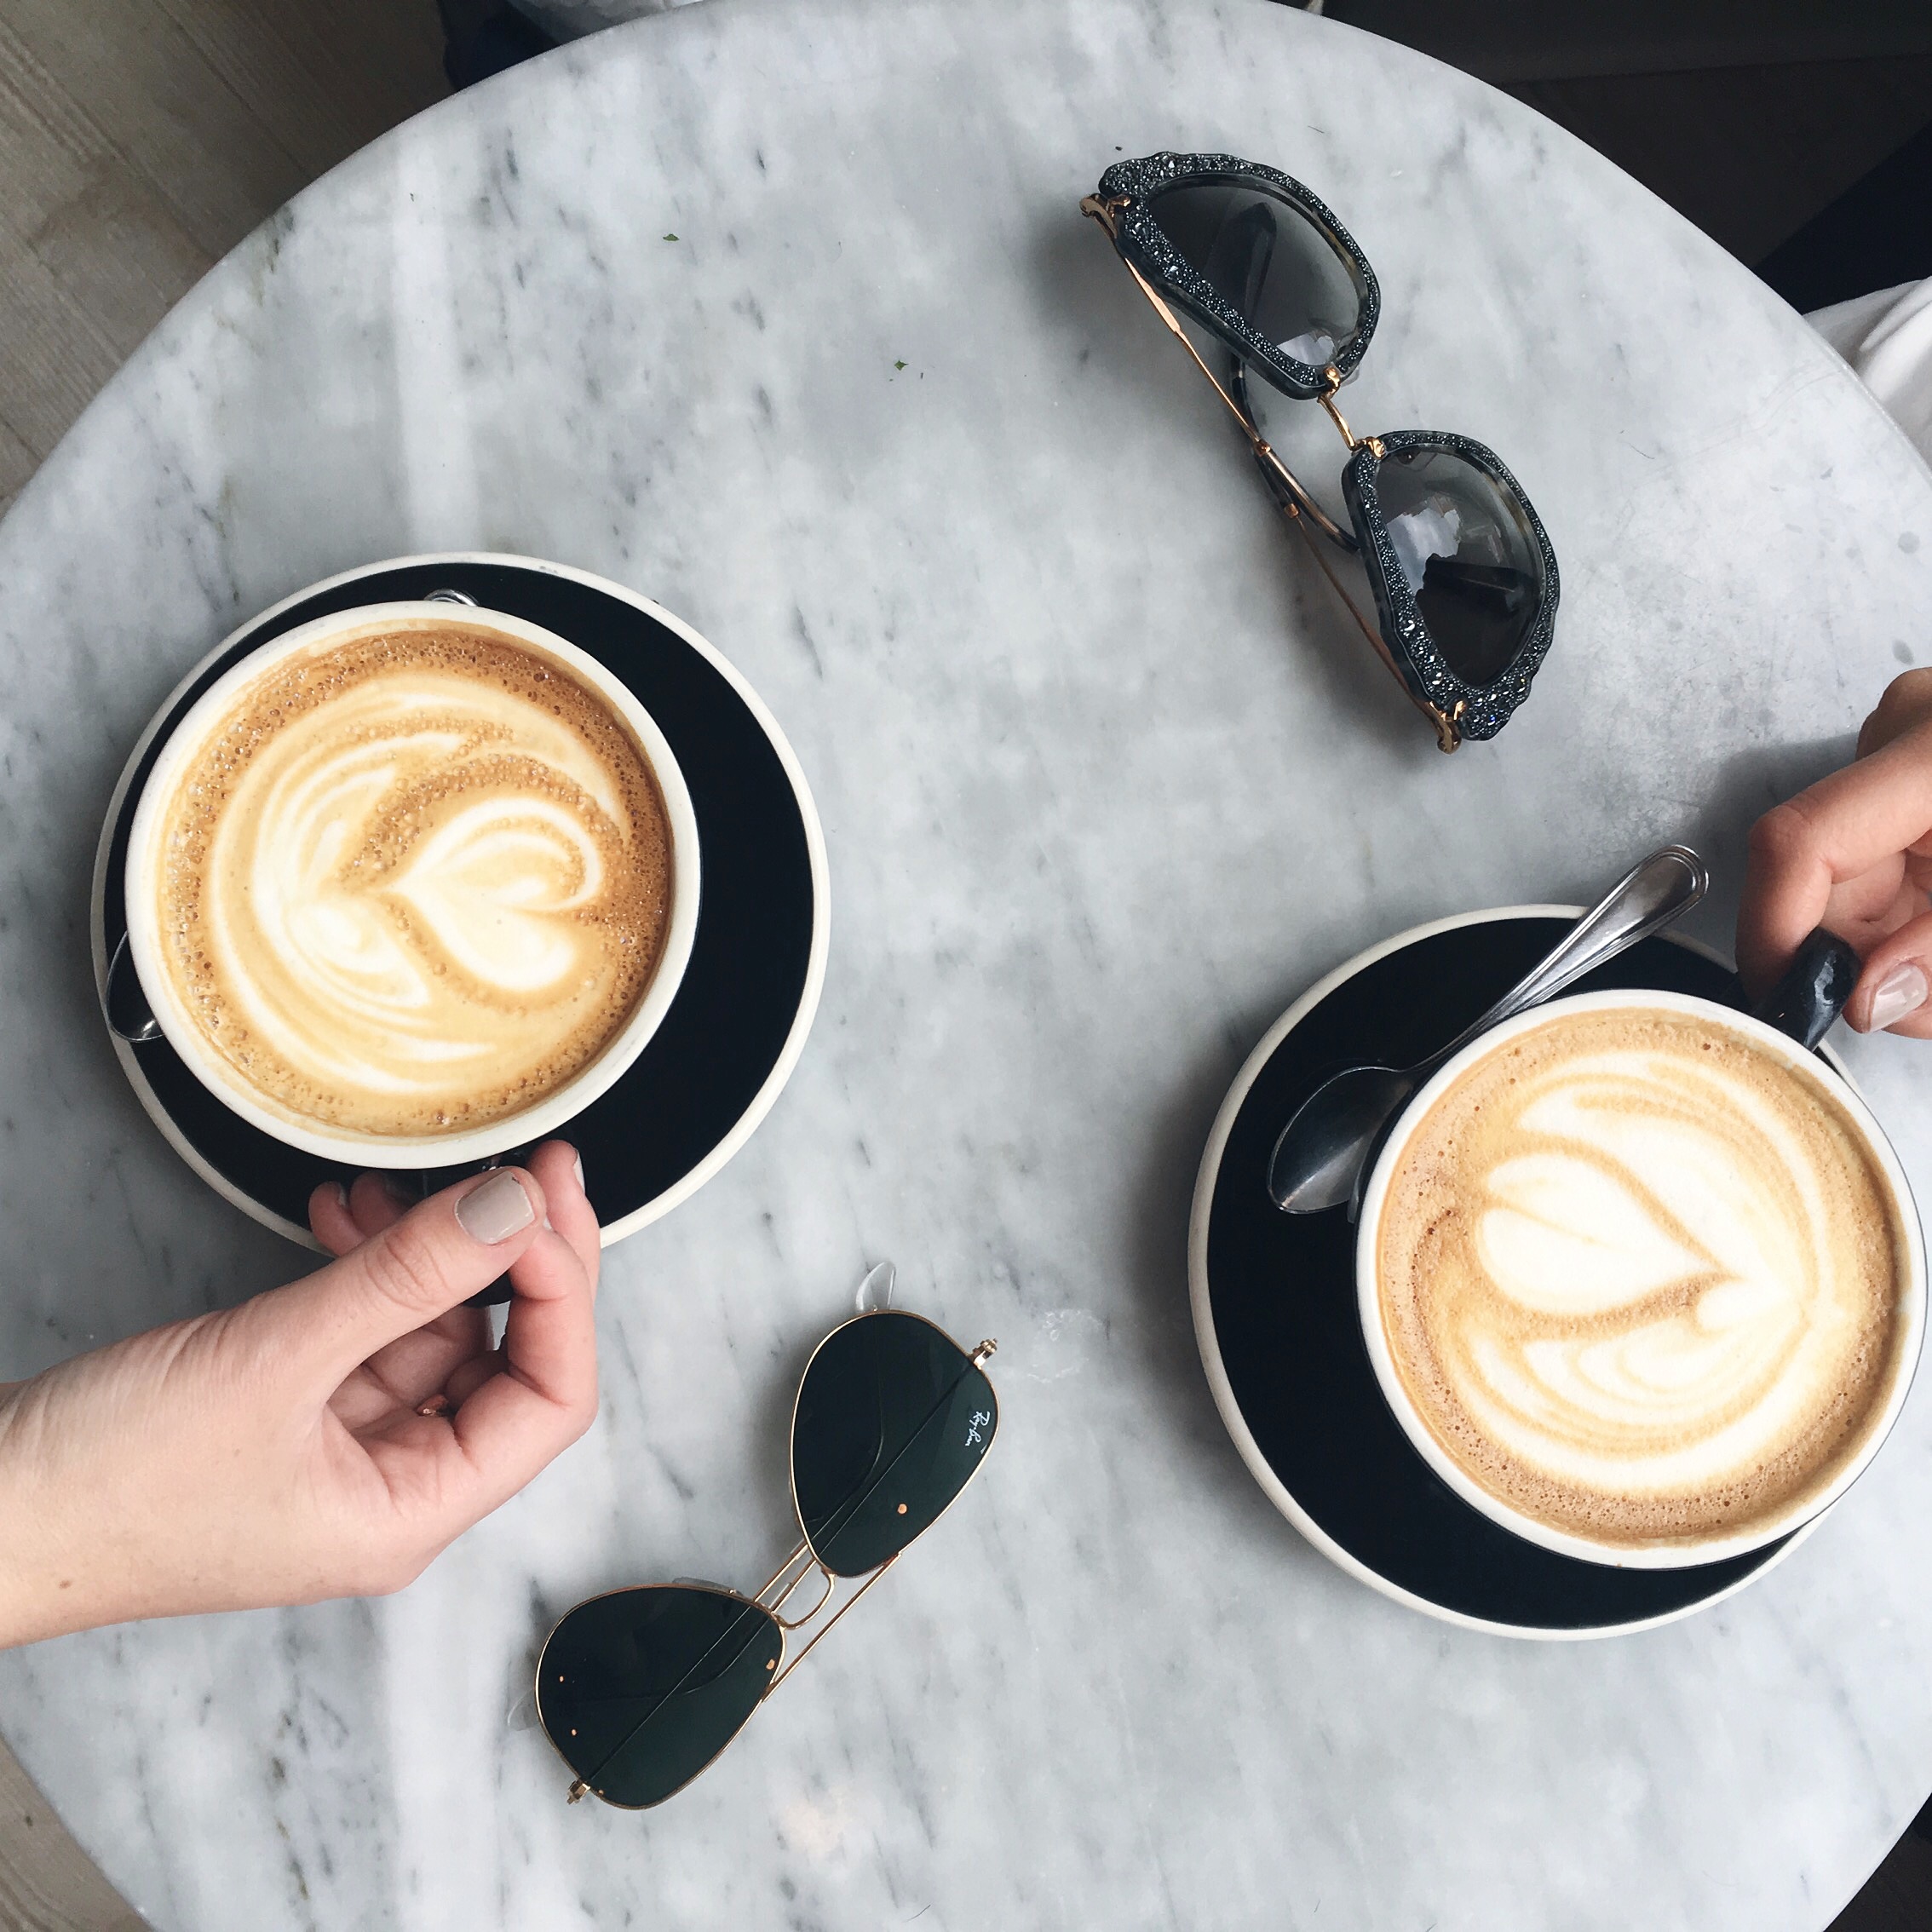 Coffee Talk The 6 Reasons Brands Aren't Reaching Out Louboutins & Love Fashion Blog Esther Santer NYC Street Style Blogger Chalait New York City Latte Art Girls Women Pretty Photography Marble Table Sunglasses Ray-Ban Shop Trend Flatlay Instagram Tips.JPG